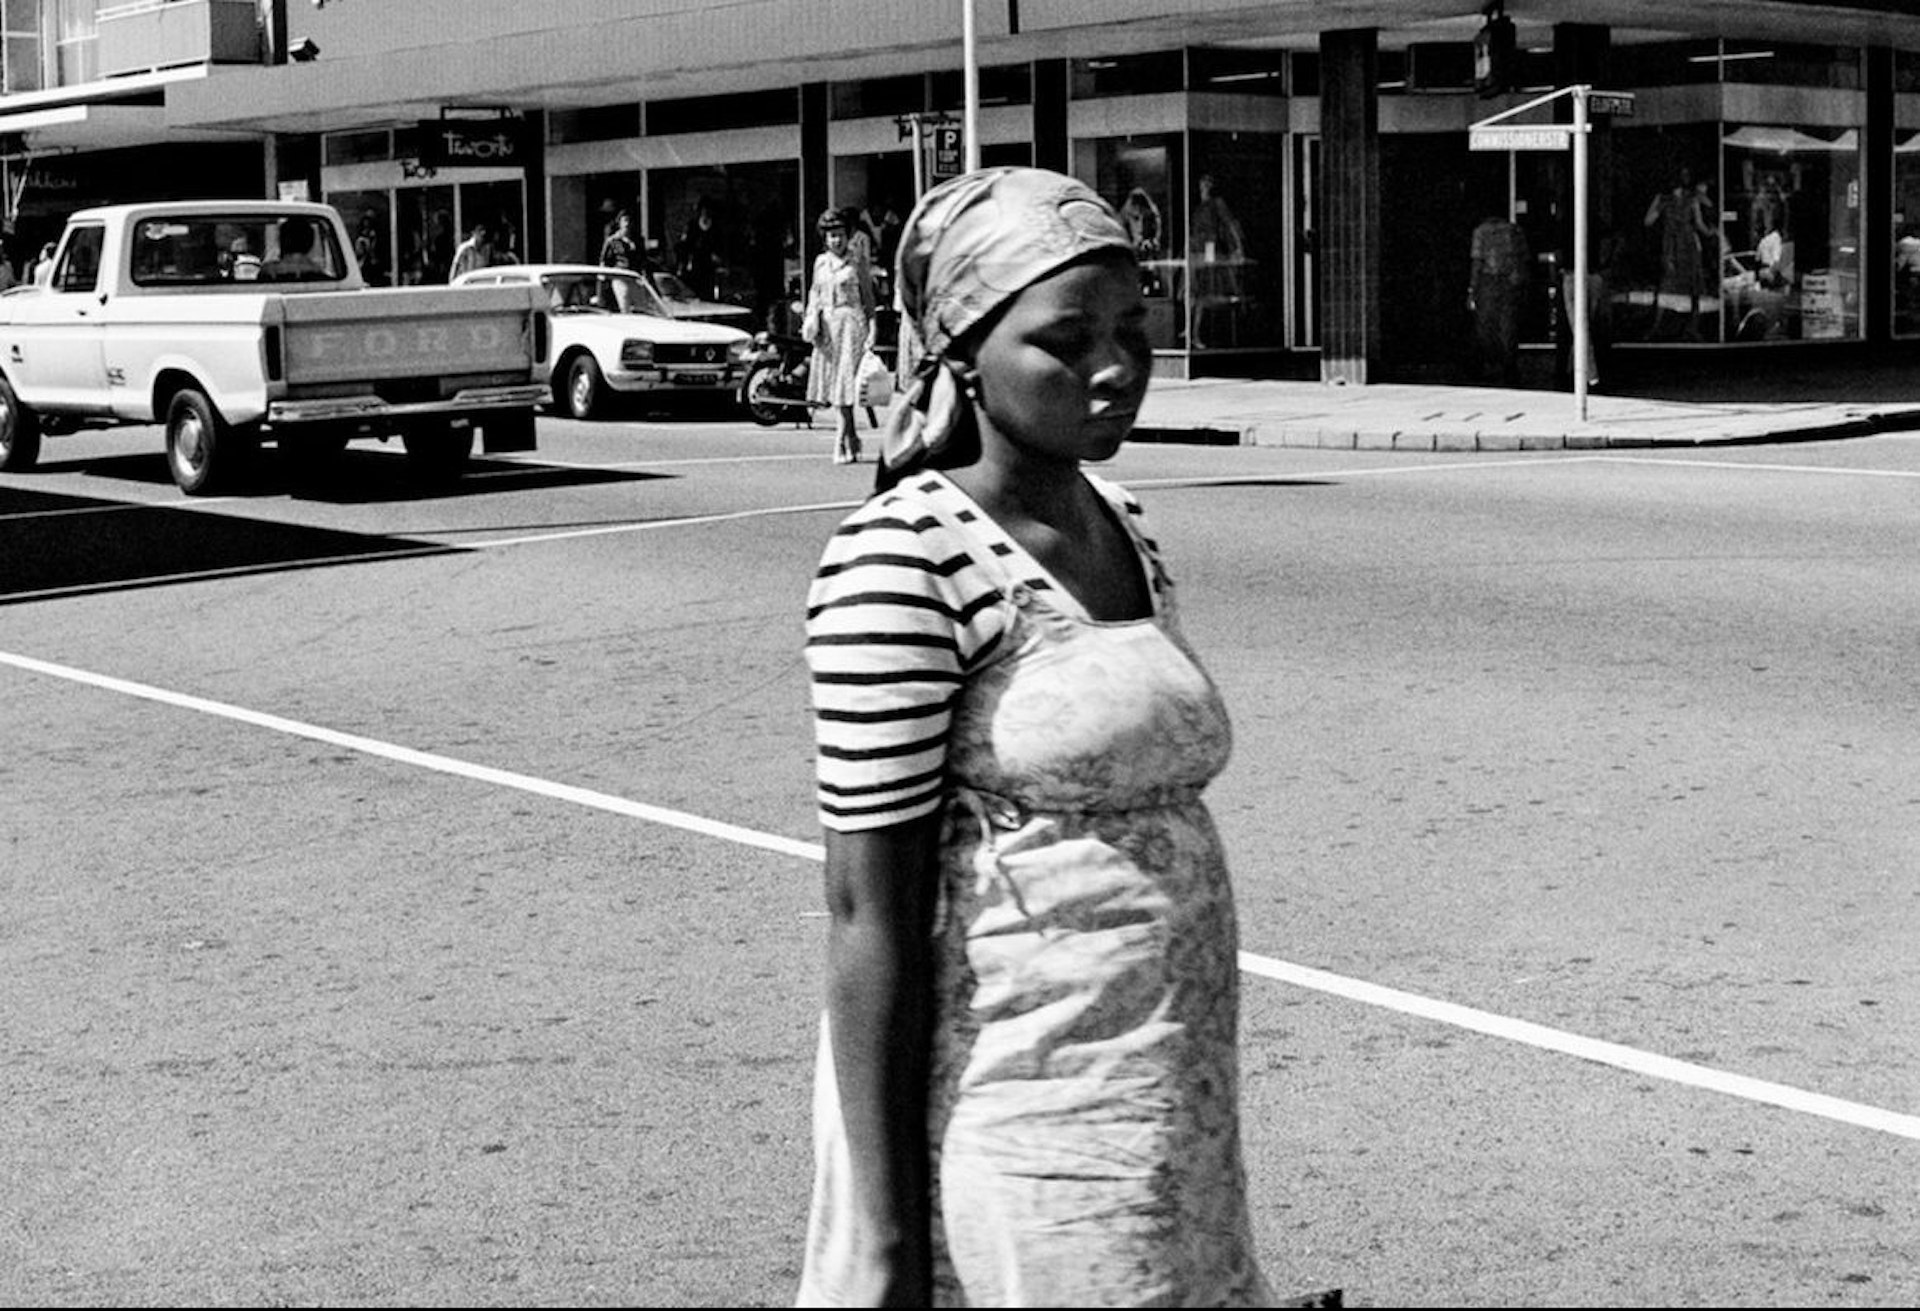 Divided land: a portrait of Apartheid South Africa